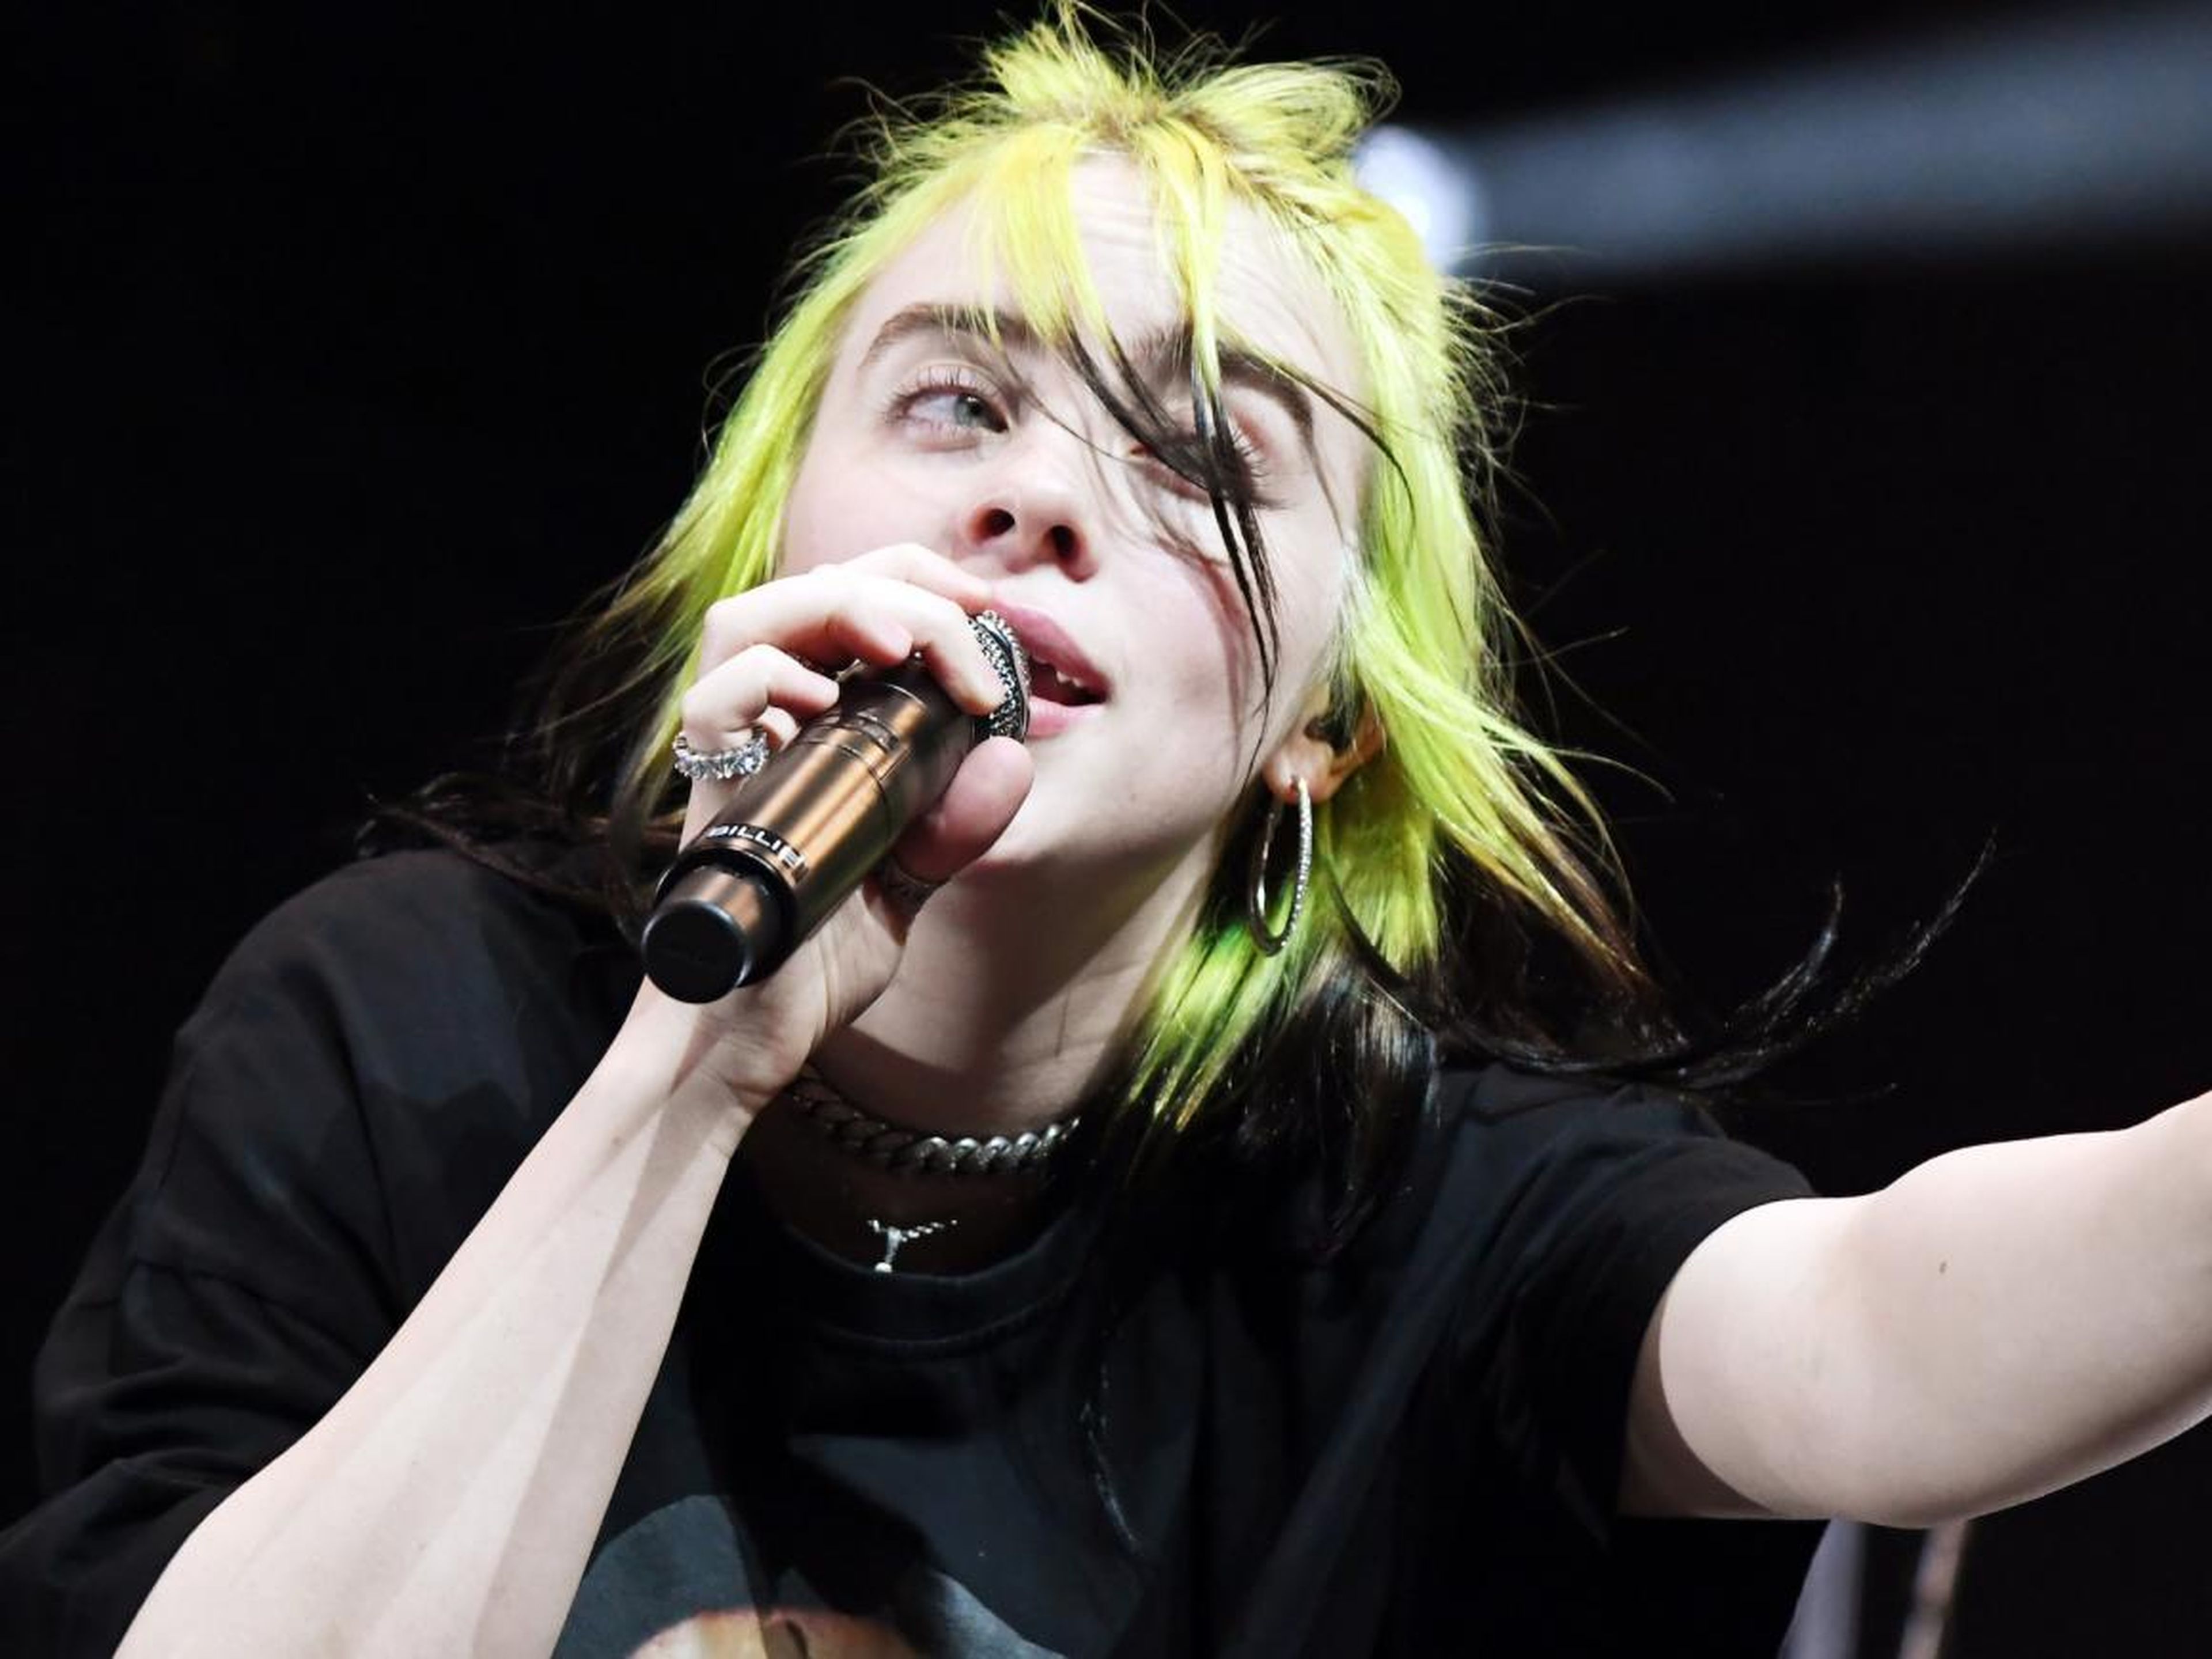 Billie Eilish's "Bad Guy" won the award for record of the year.